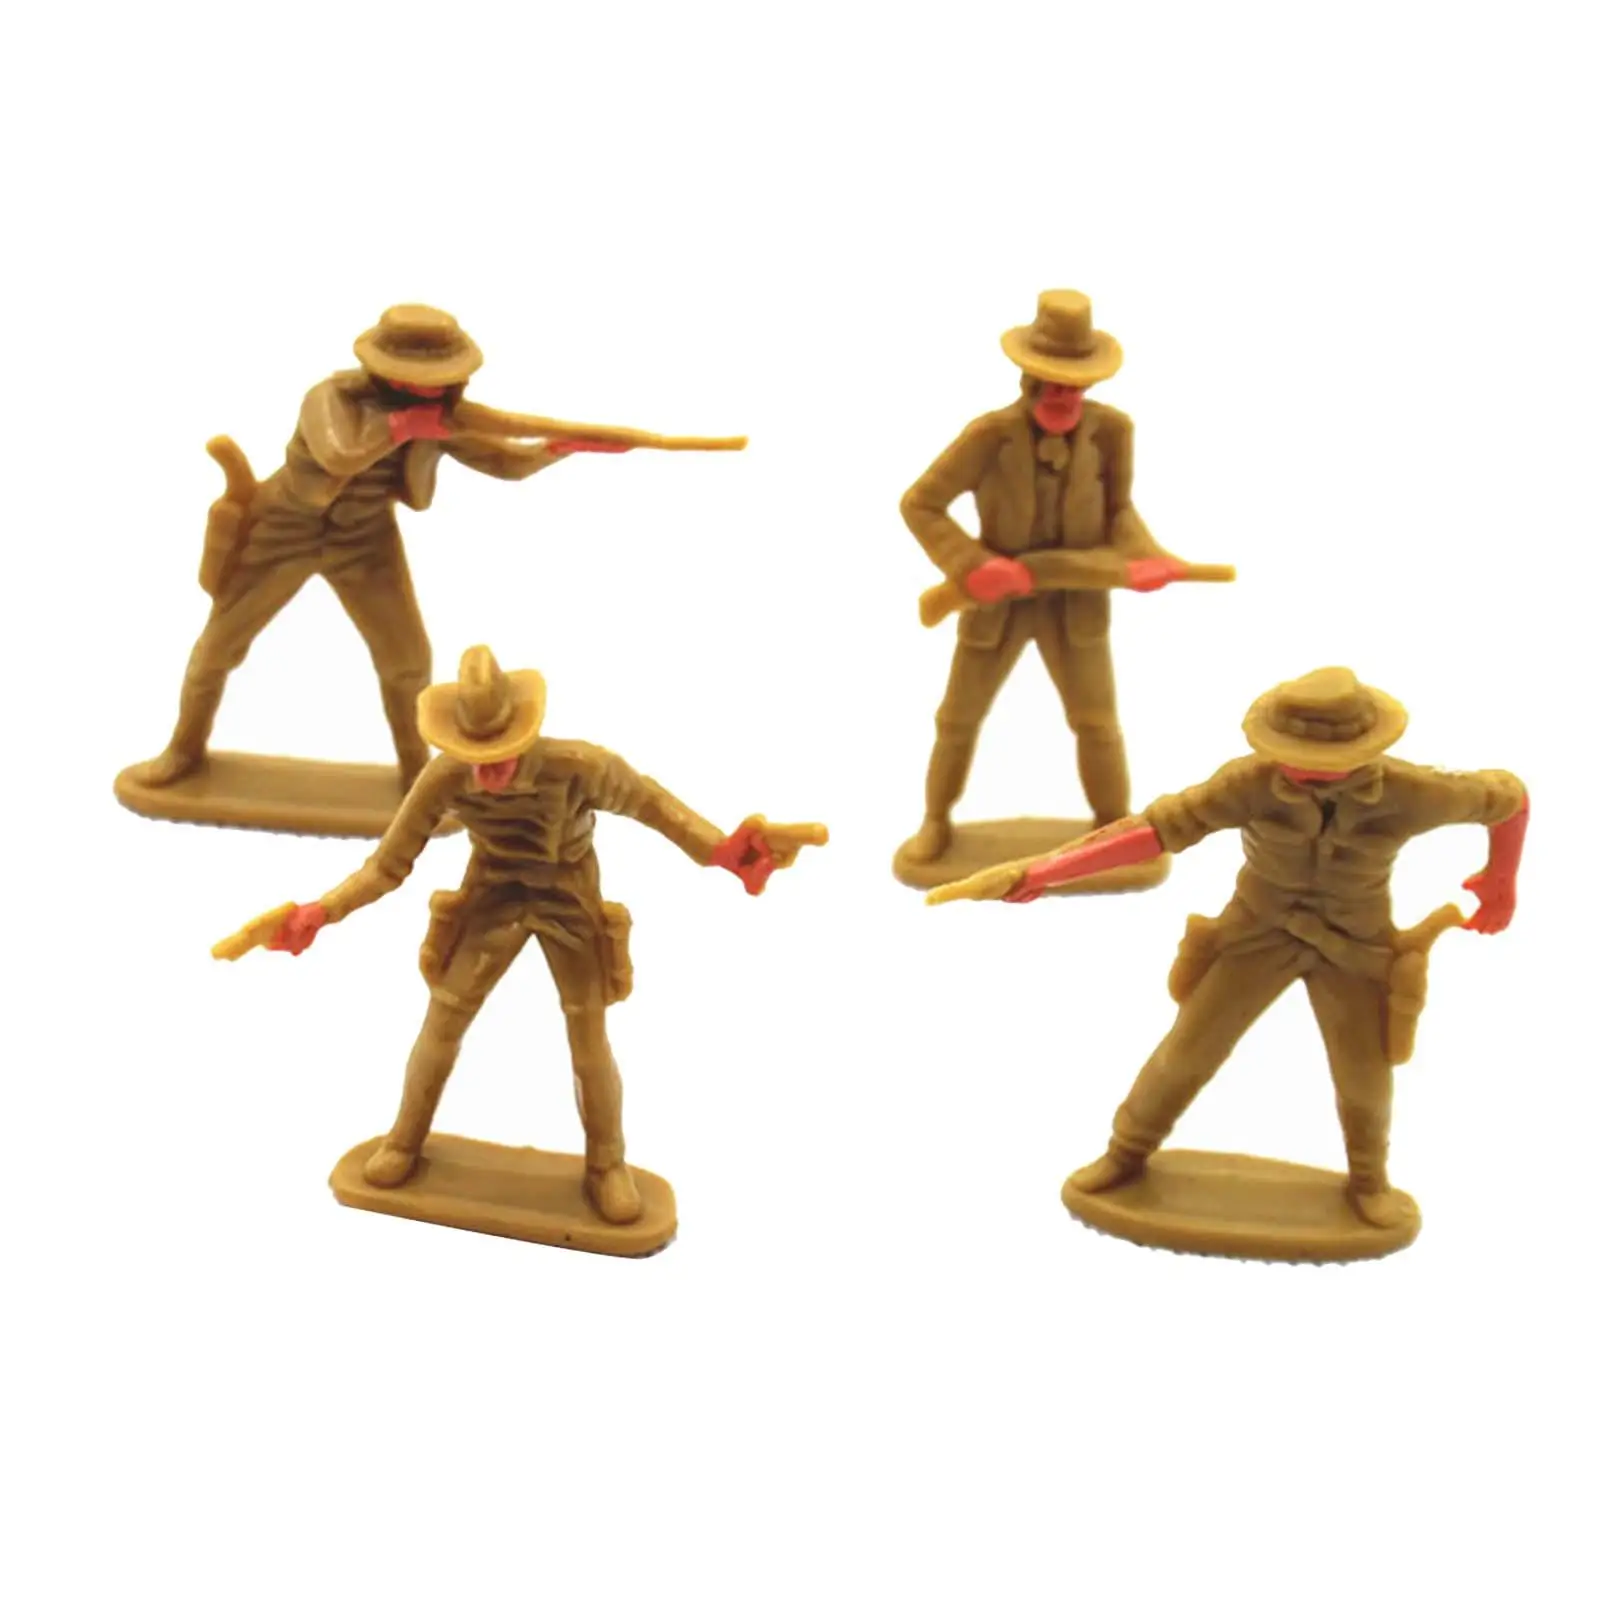 4x Simulation Cowboy Figure Model Desktop Ornament Sand Table Layout Decoration Collections Realistic Figurines Diorama Scenery